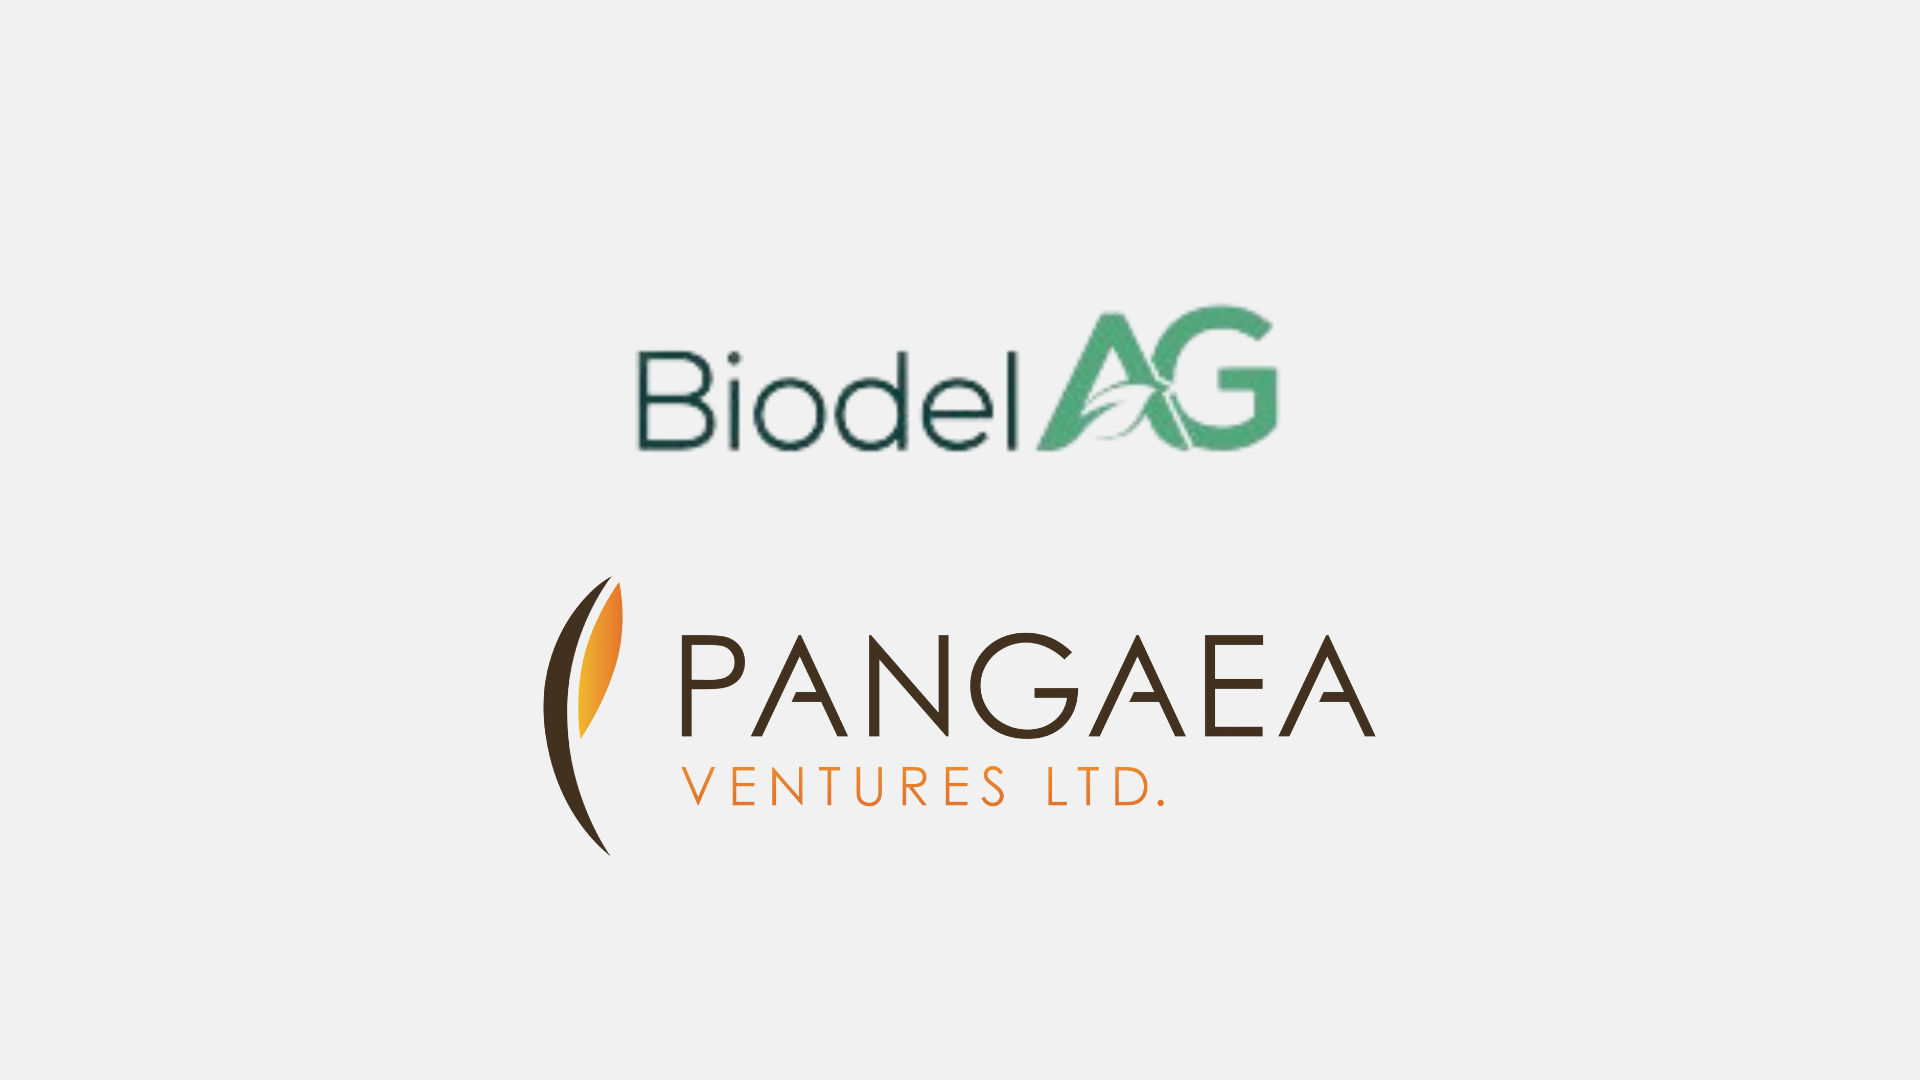 Biodel AG Secures Series A Investment from Pangaea Ventures to Advance New Regenerative Agriculture Technologies